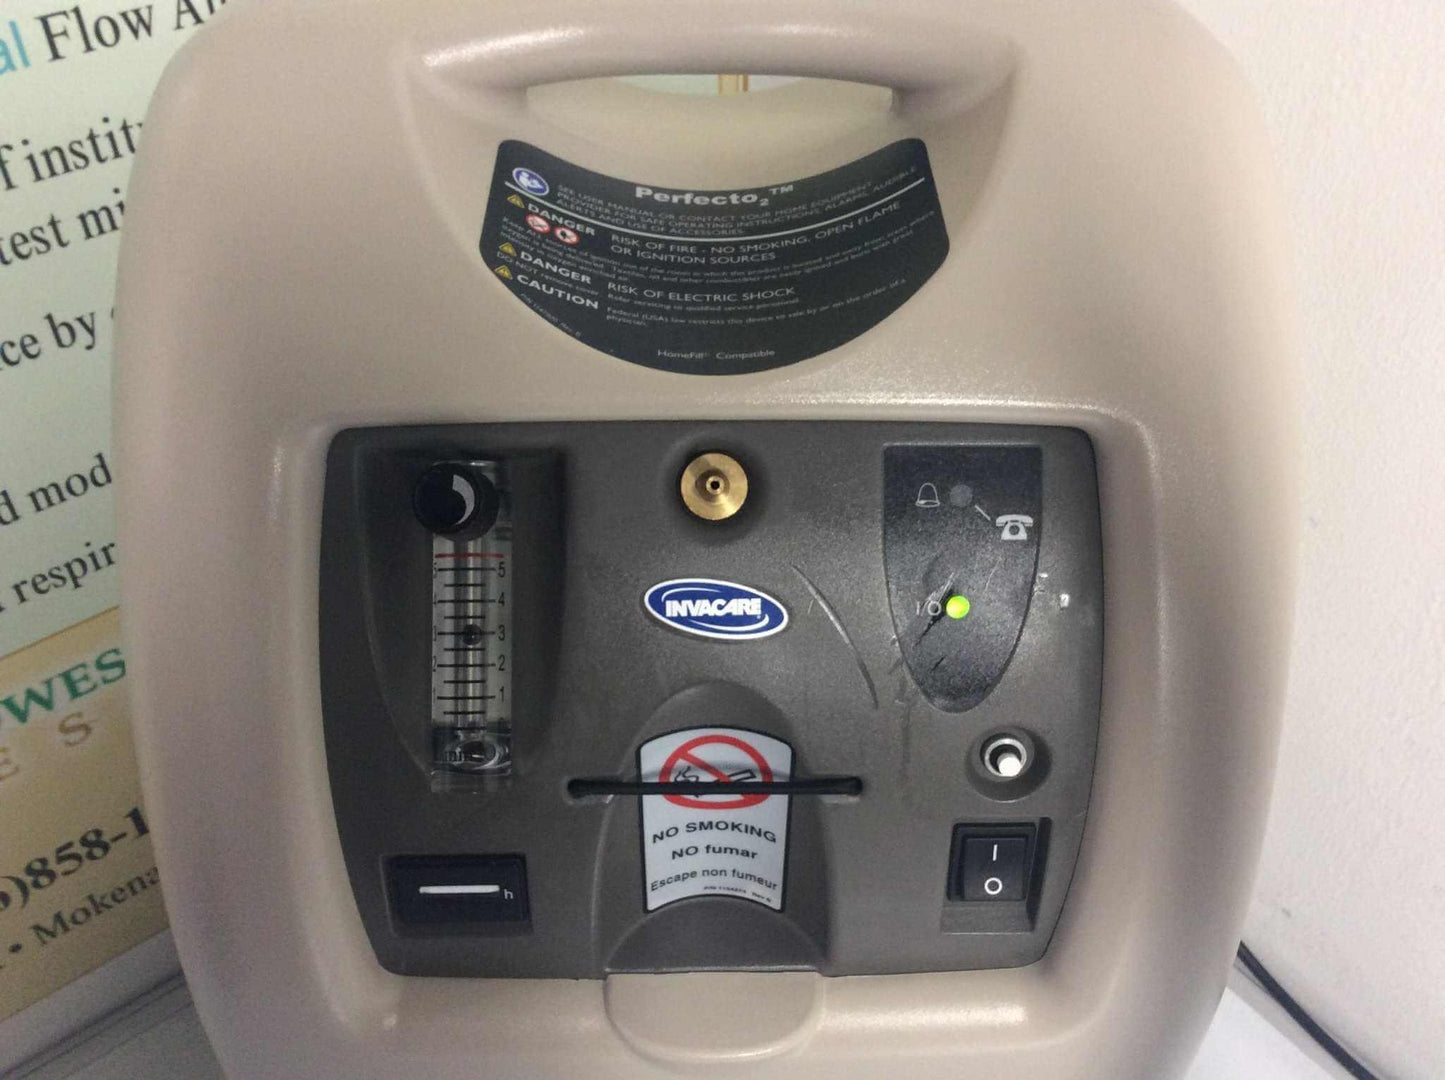 REFURBISHED Invacare Perfecto2 5 Liter Oxygen Concentrator IRC5PO2 Warranty FREE Shipping - MBR Medicals